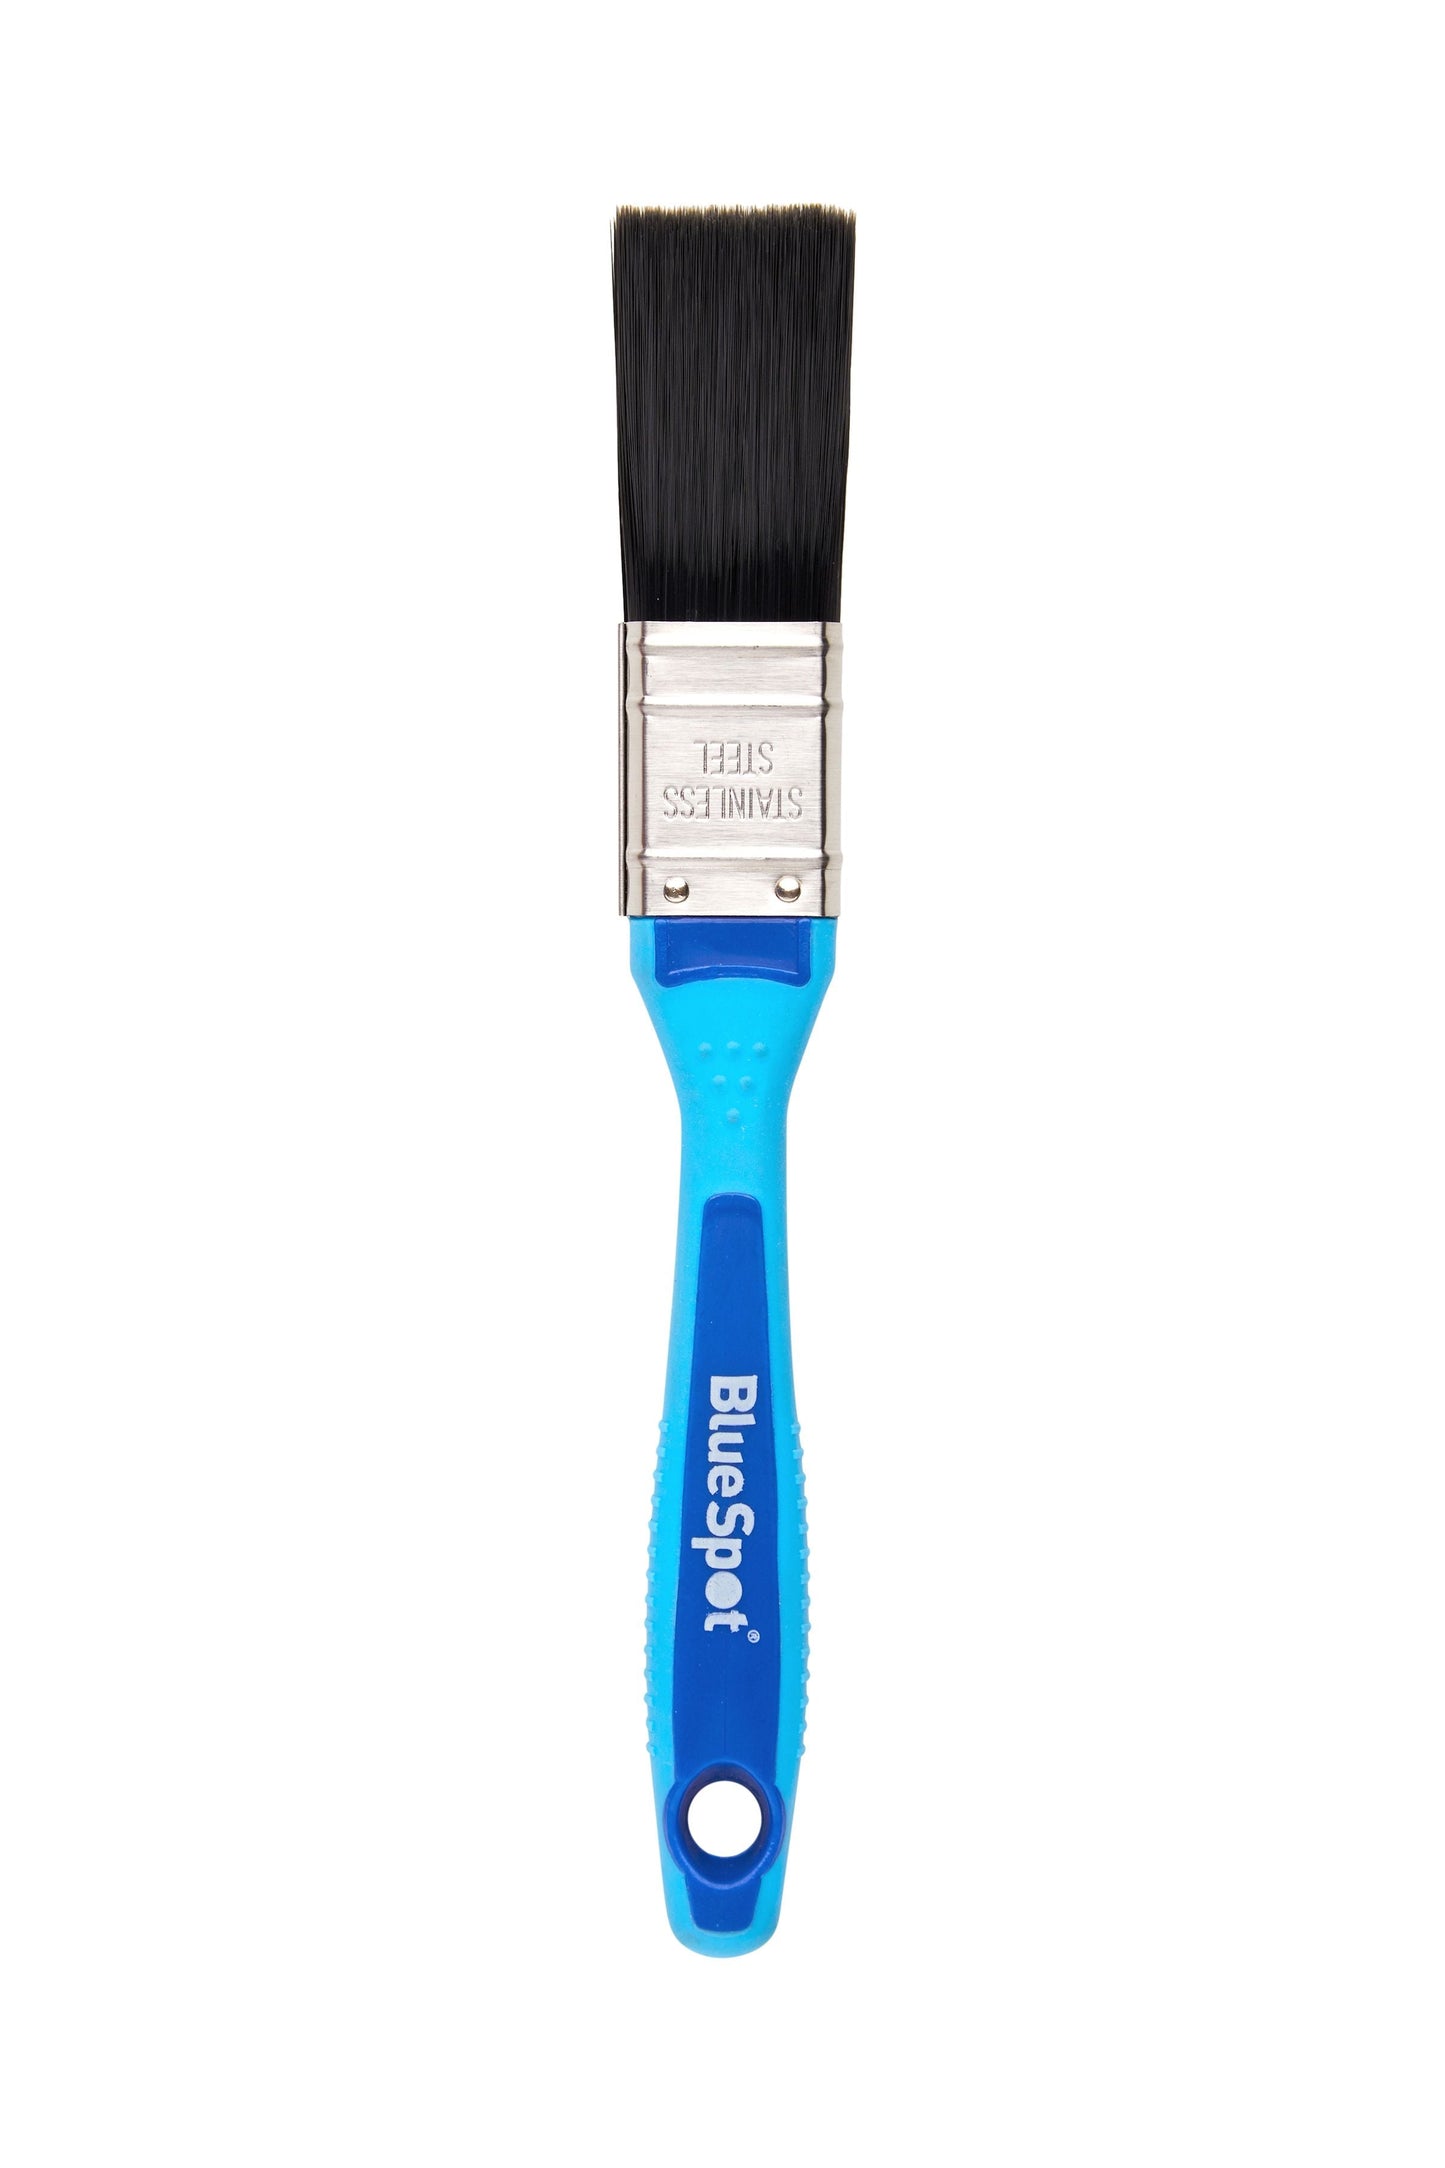 1" (25MM) SYNTHETIC PAINT BRUSH WITH SOFT GRIP HANDLE